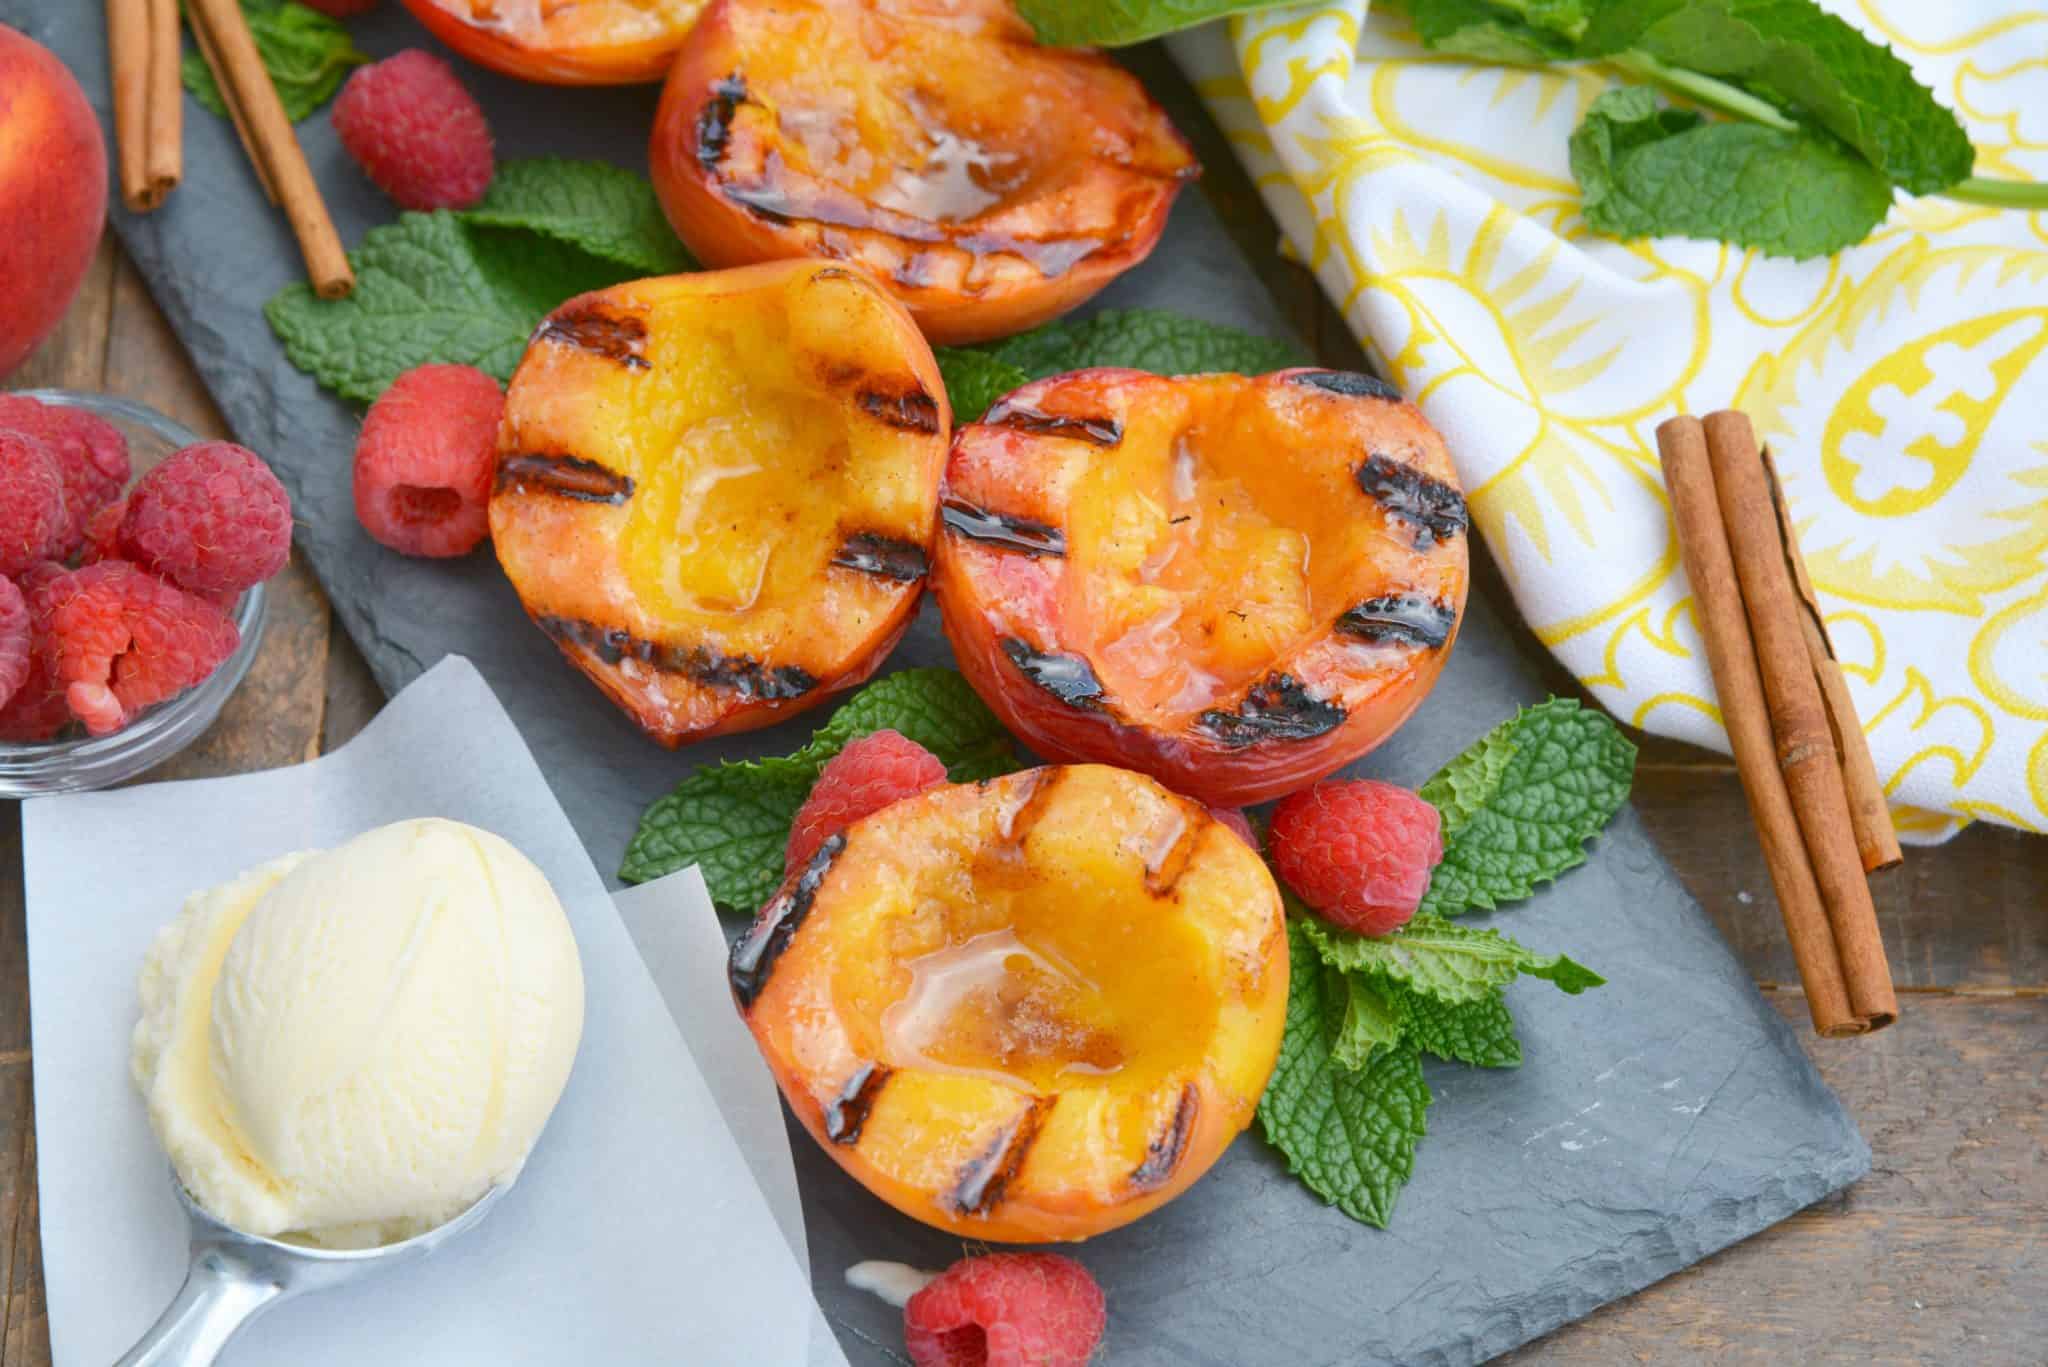 Grilled Peaches basted with cinnamon brown sugar and butter are the ultimate summer dessert idea. Add vanilla ice cream and fresh raspberries for dessert perfection! #grilledpeaches www.savoryexperiments.com